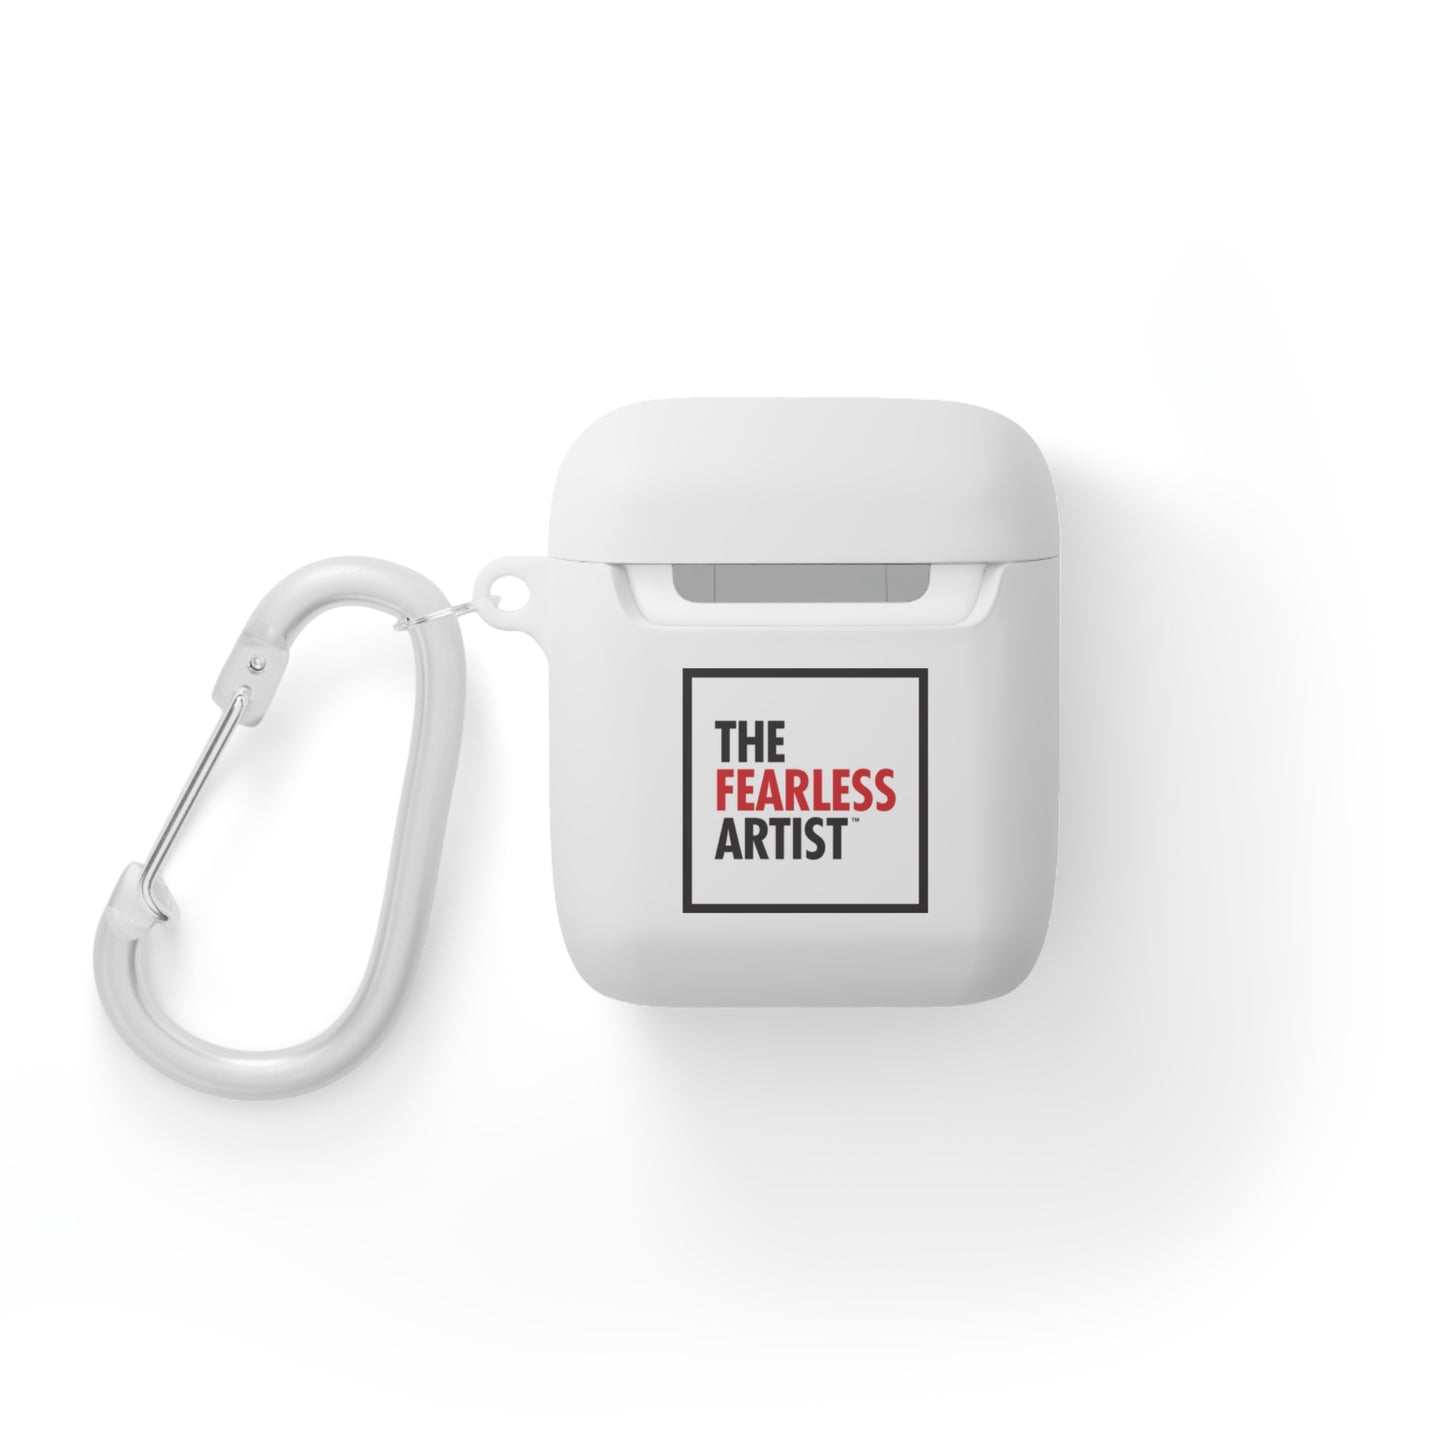 AirPods and AirPods Pro Case Cover - The Fearless Artist (Black and Red)